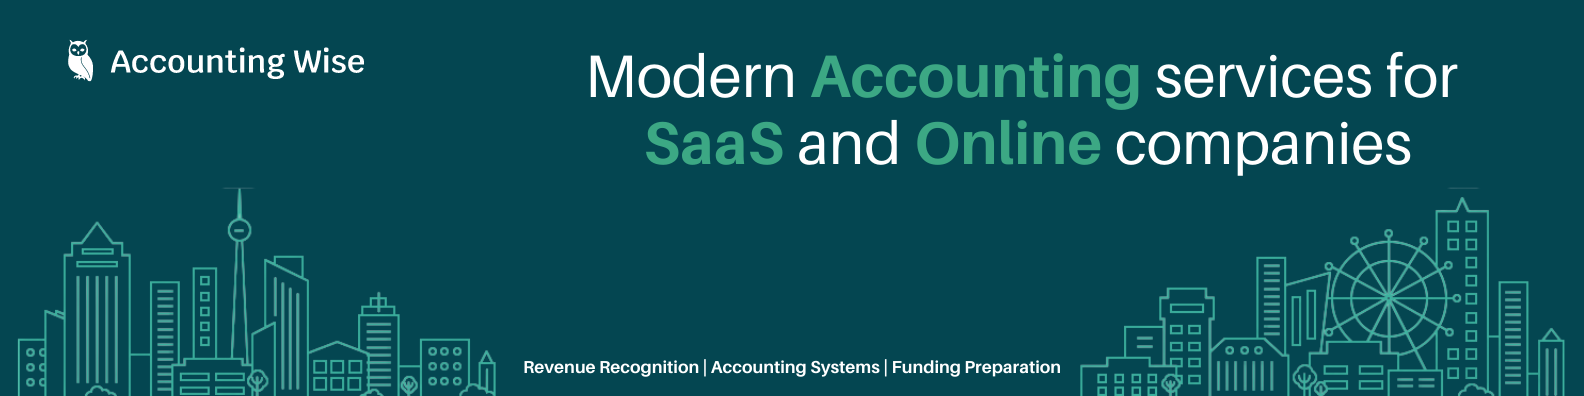 Accounting Wise, Inc. | Modern Accounting services for SaaS and Online companies